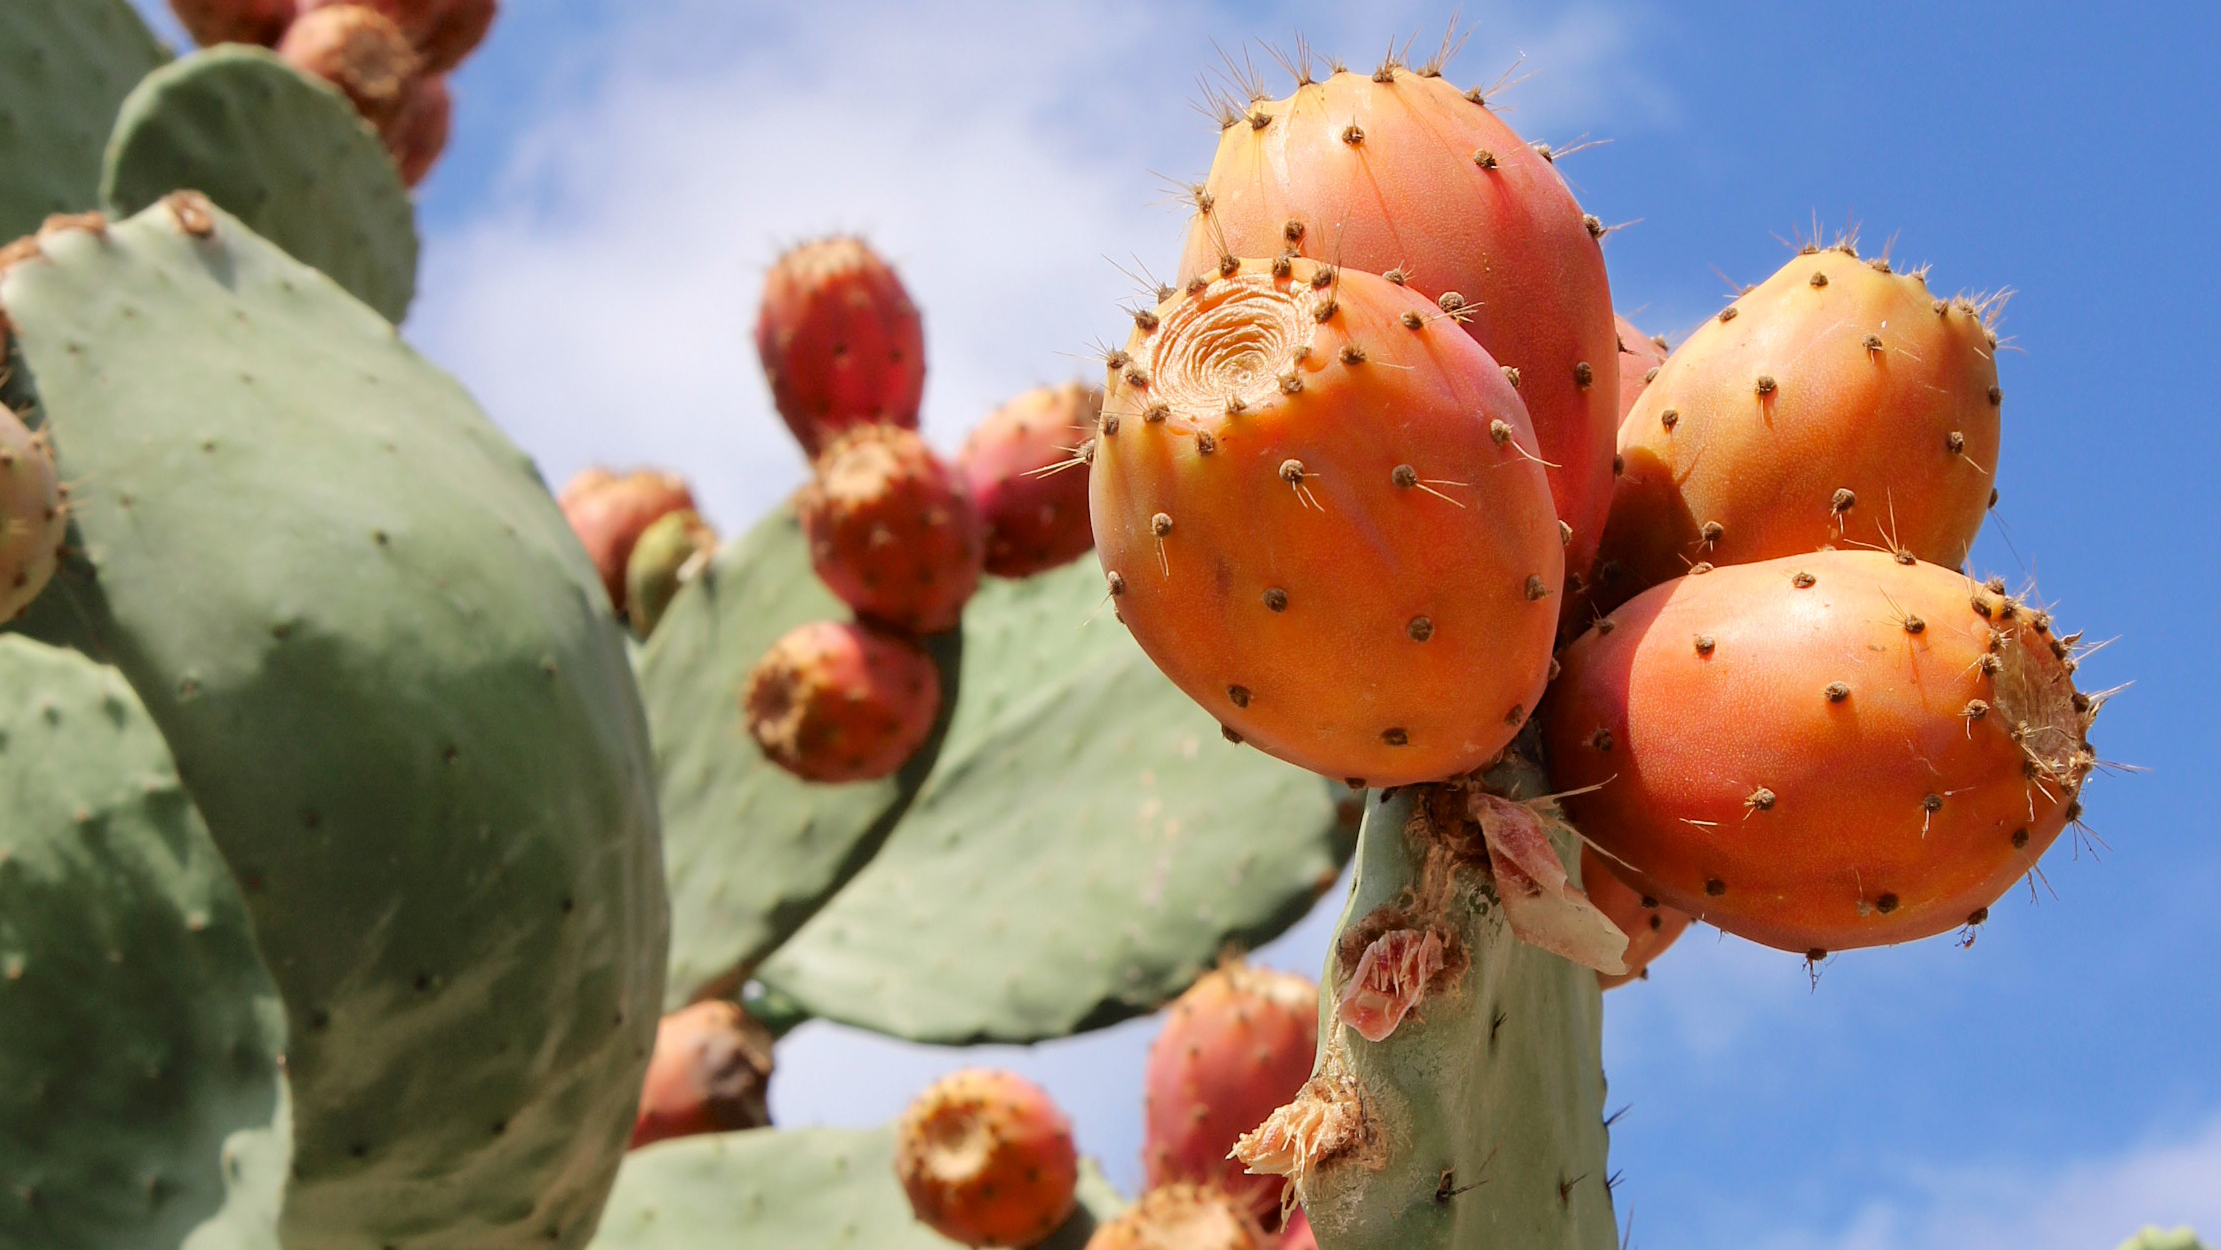 Opuntia ficus indica. Photo © Karol Franks / Flickr through a Creative Commons license